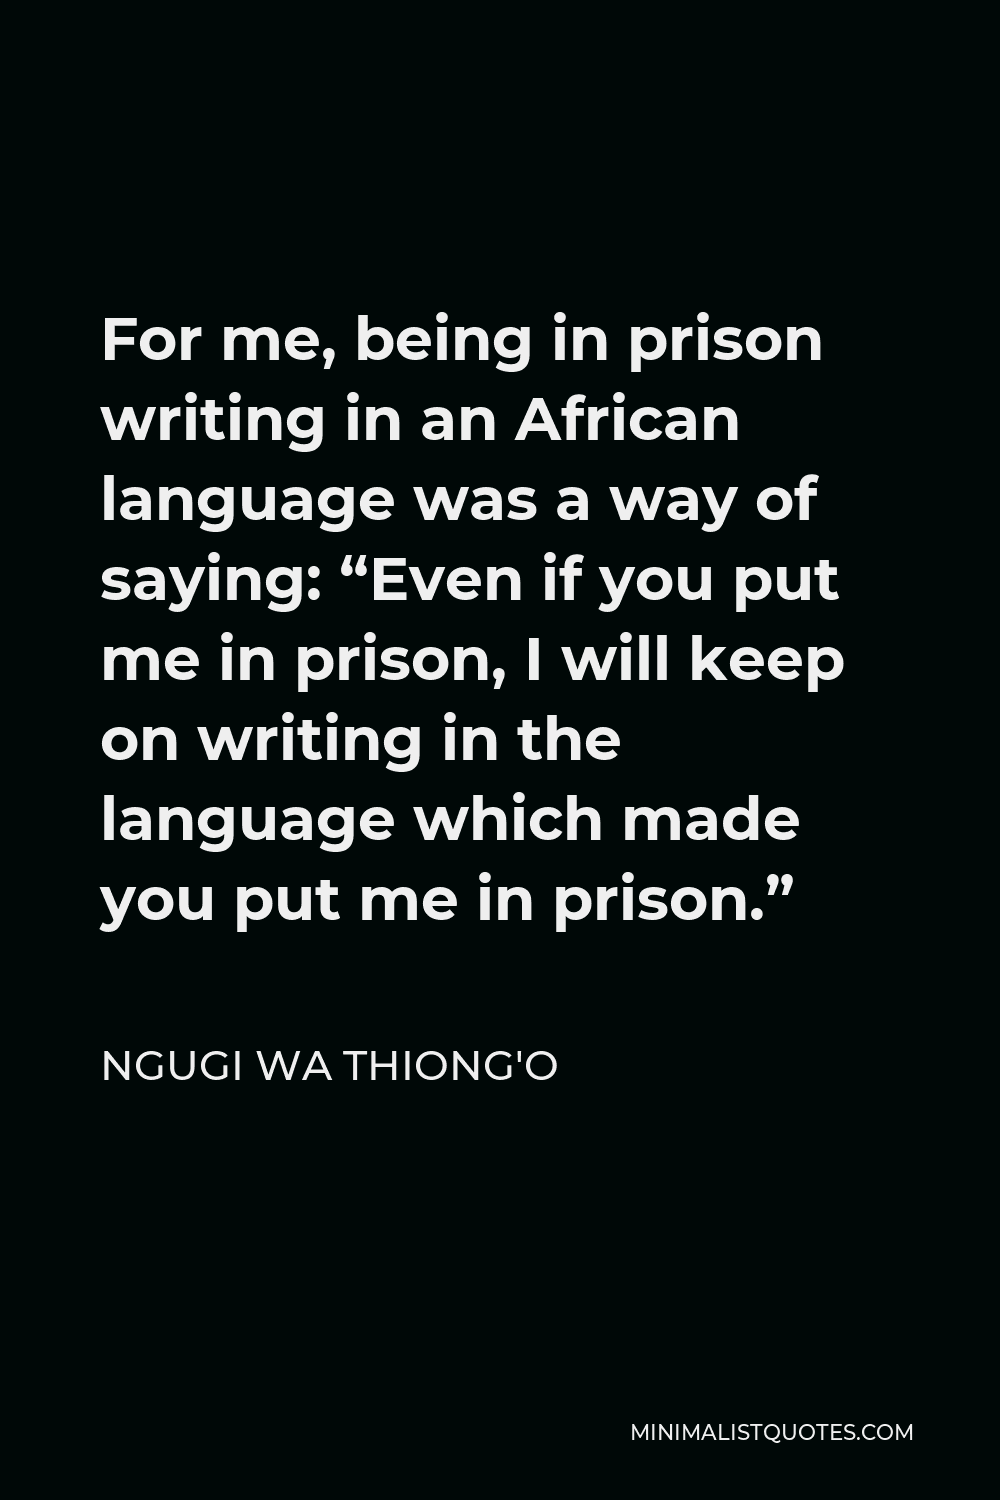 Ngugi wa Thiong'o Quote - For me, being in prison writing in an African language was a way of saying: “Even if you put me in prison, I will keep on writing in the language which made you put me in prison.”